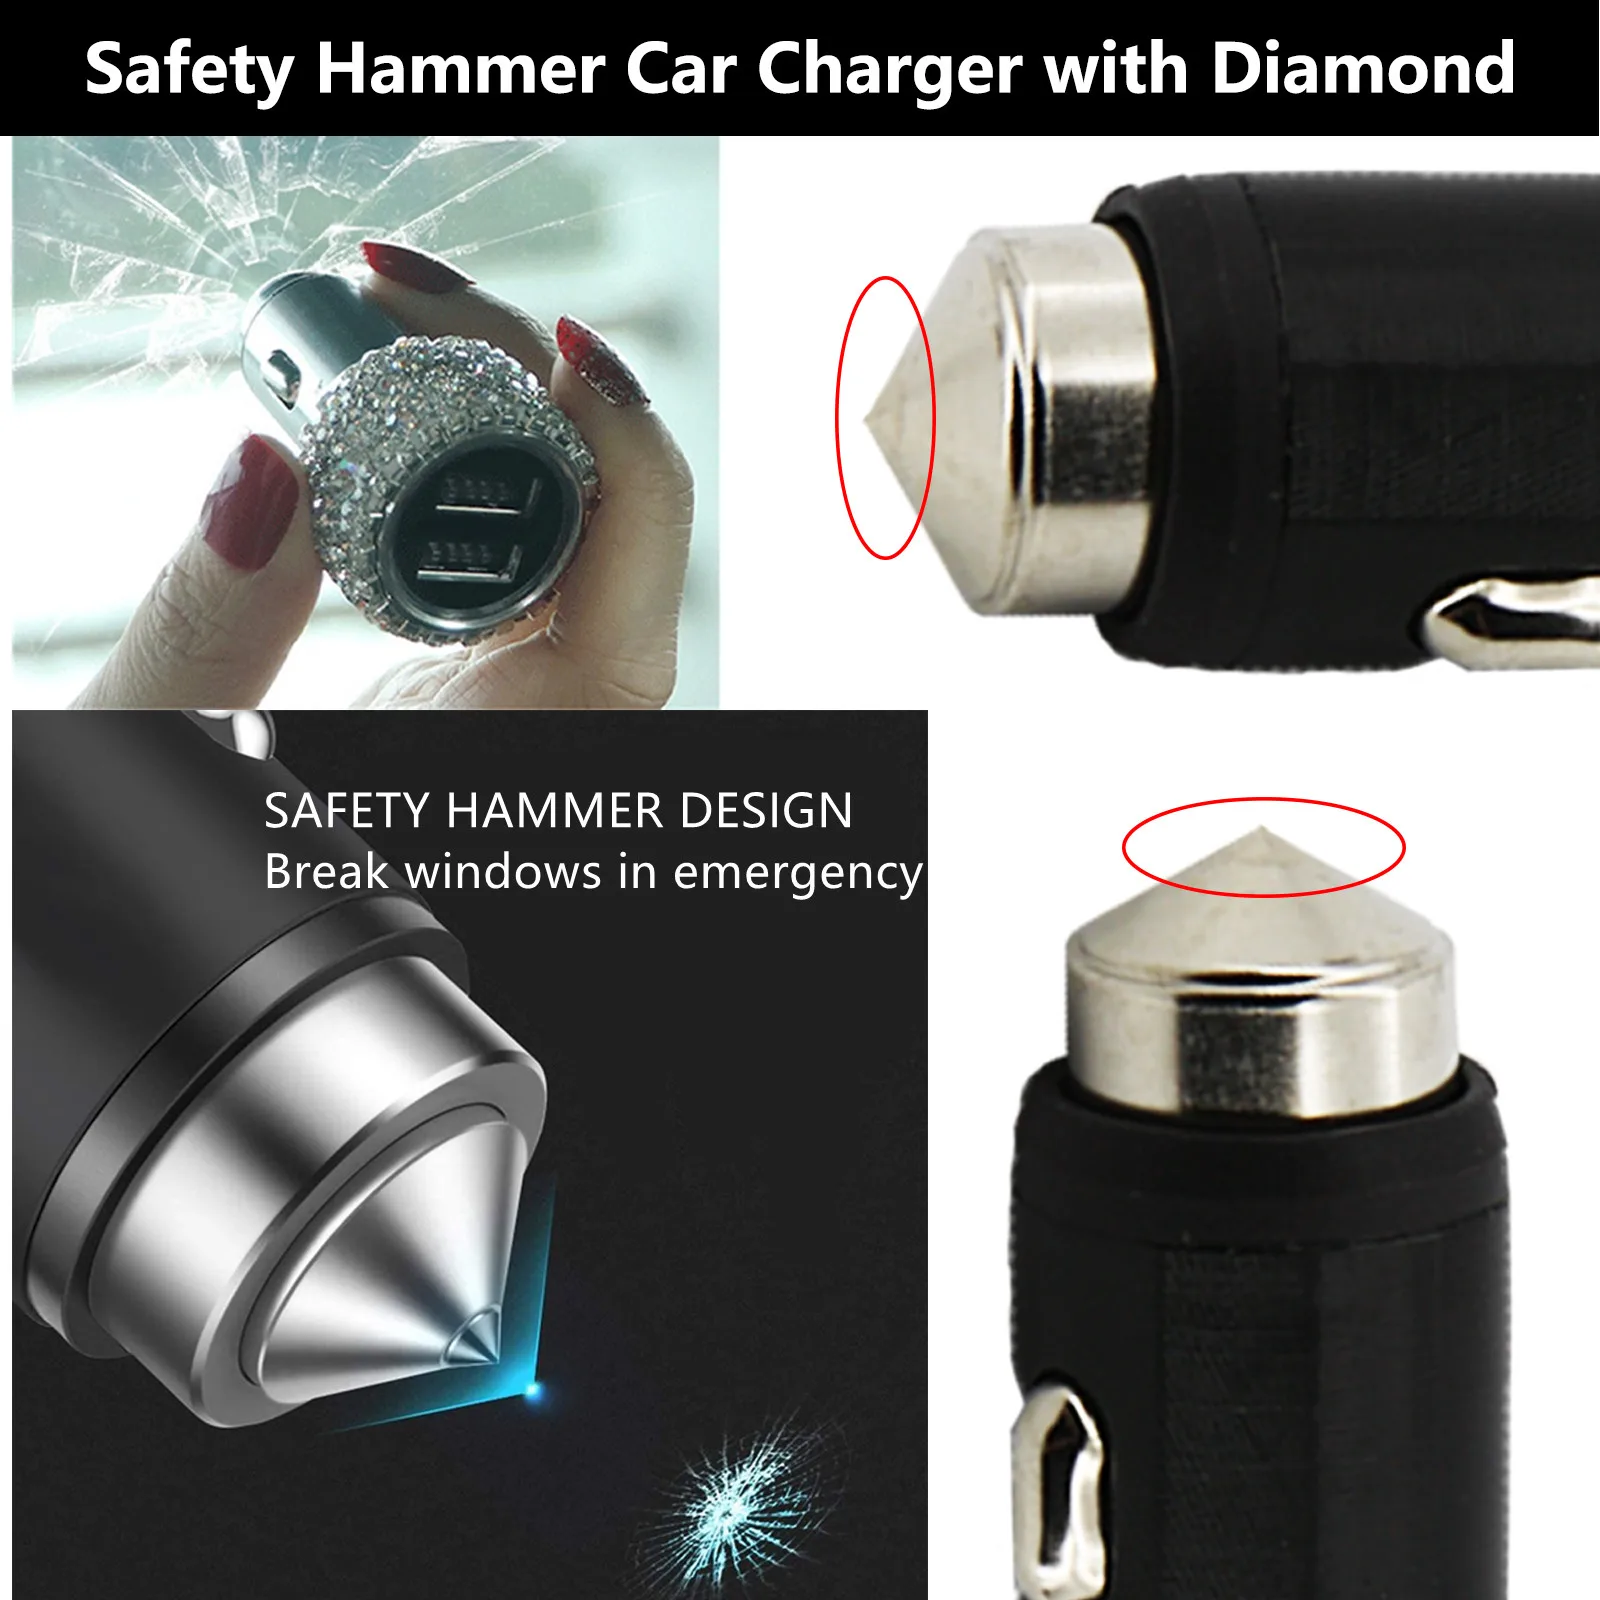 Car Charger Dual USB Adapter Cigarette Lighter LED Voltmeter For All Types Mobile Phone Charger Smart Safety Hammer Charger